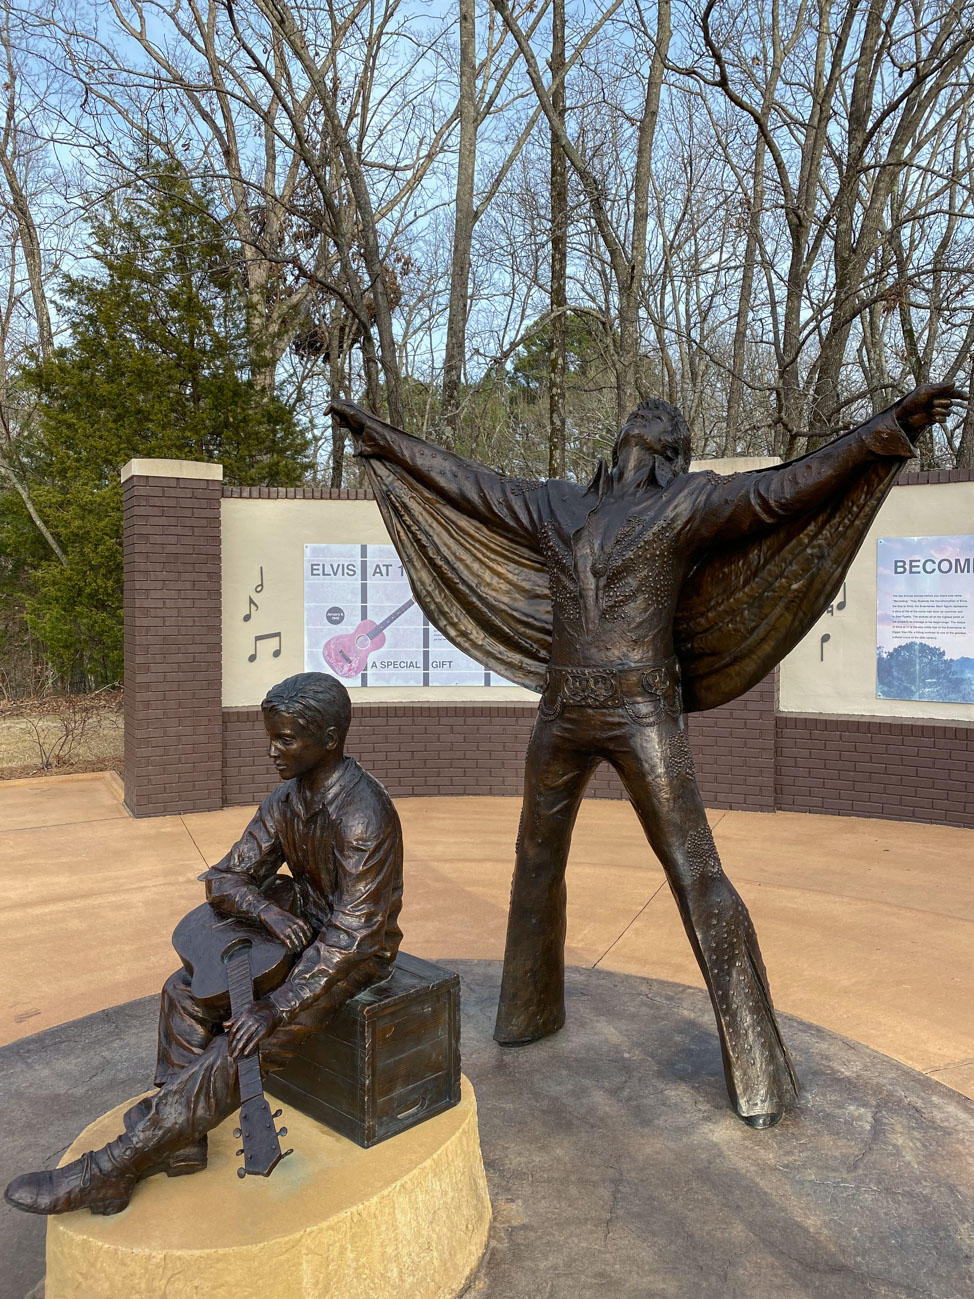 Becoming statue of Elvis in Tupelo, Mississippi